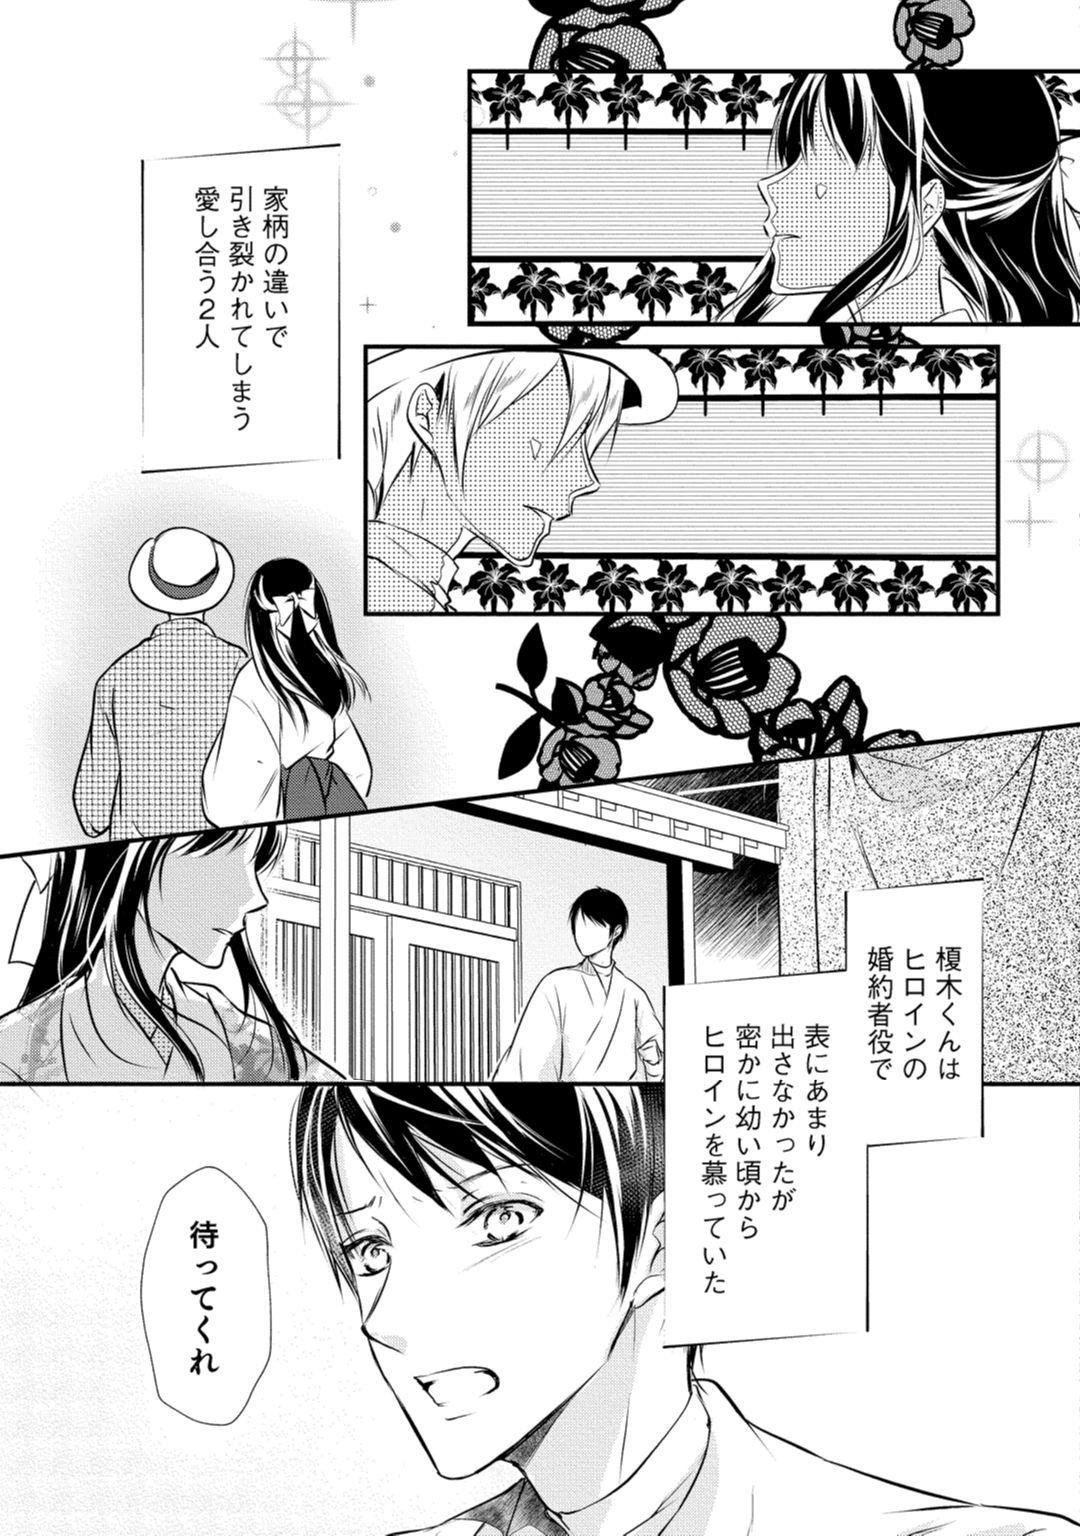 Atm 上司が恋を信じない 後編2 Hot Couple Sex - Page 9